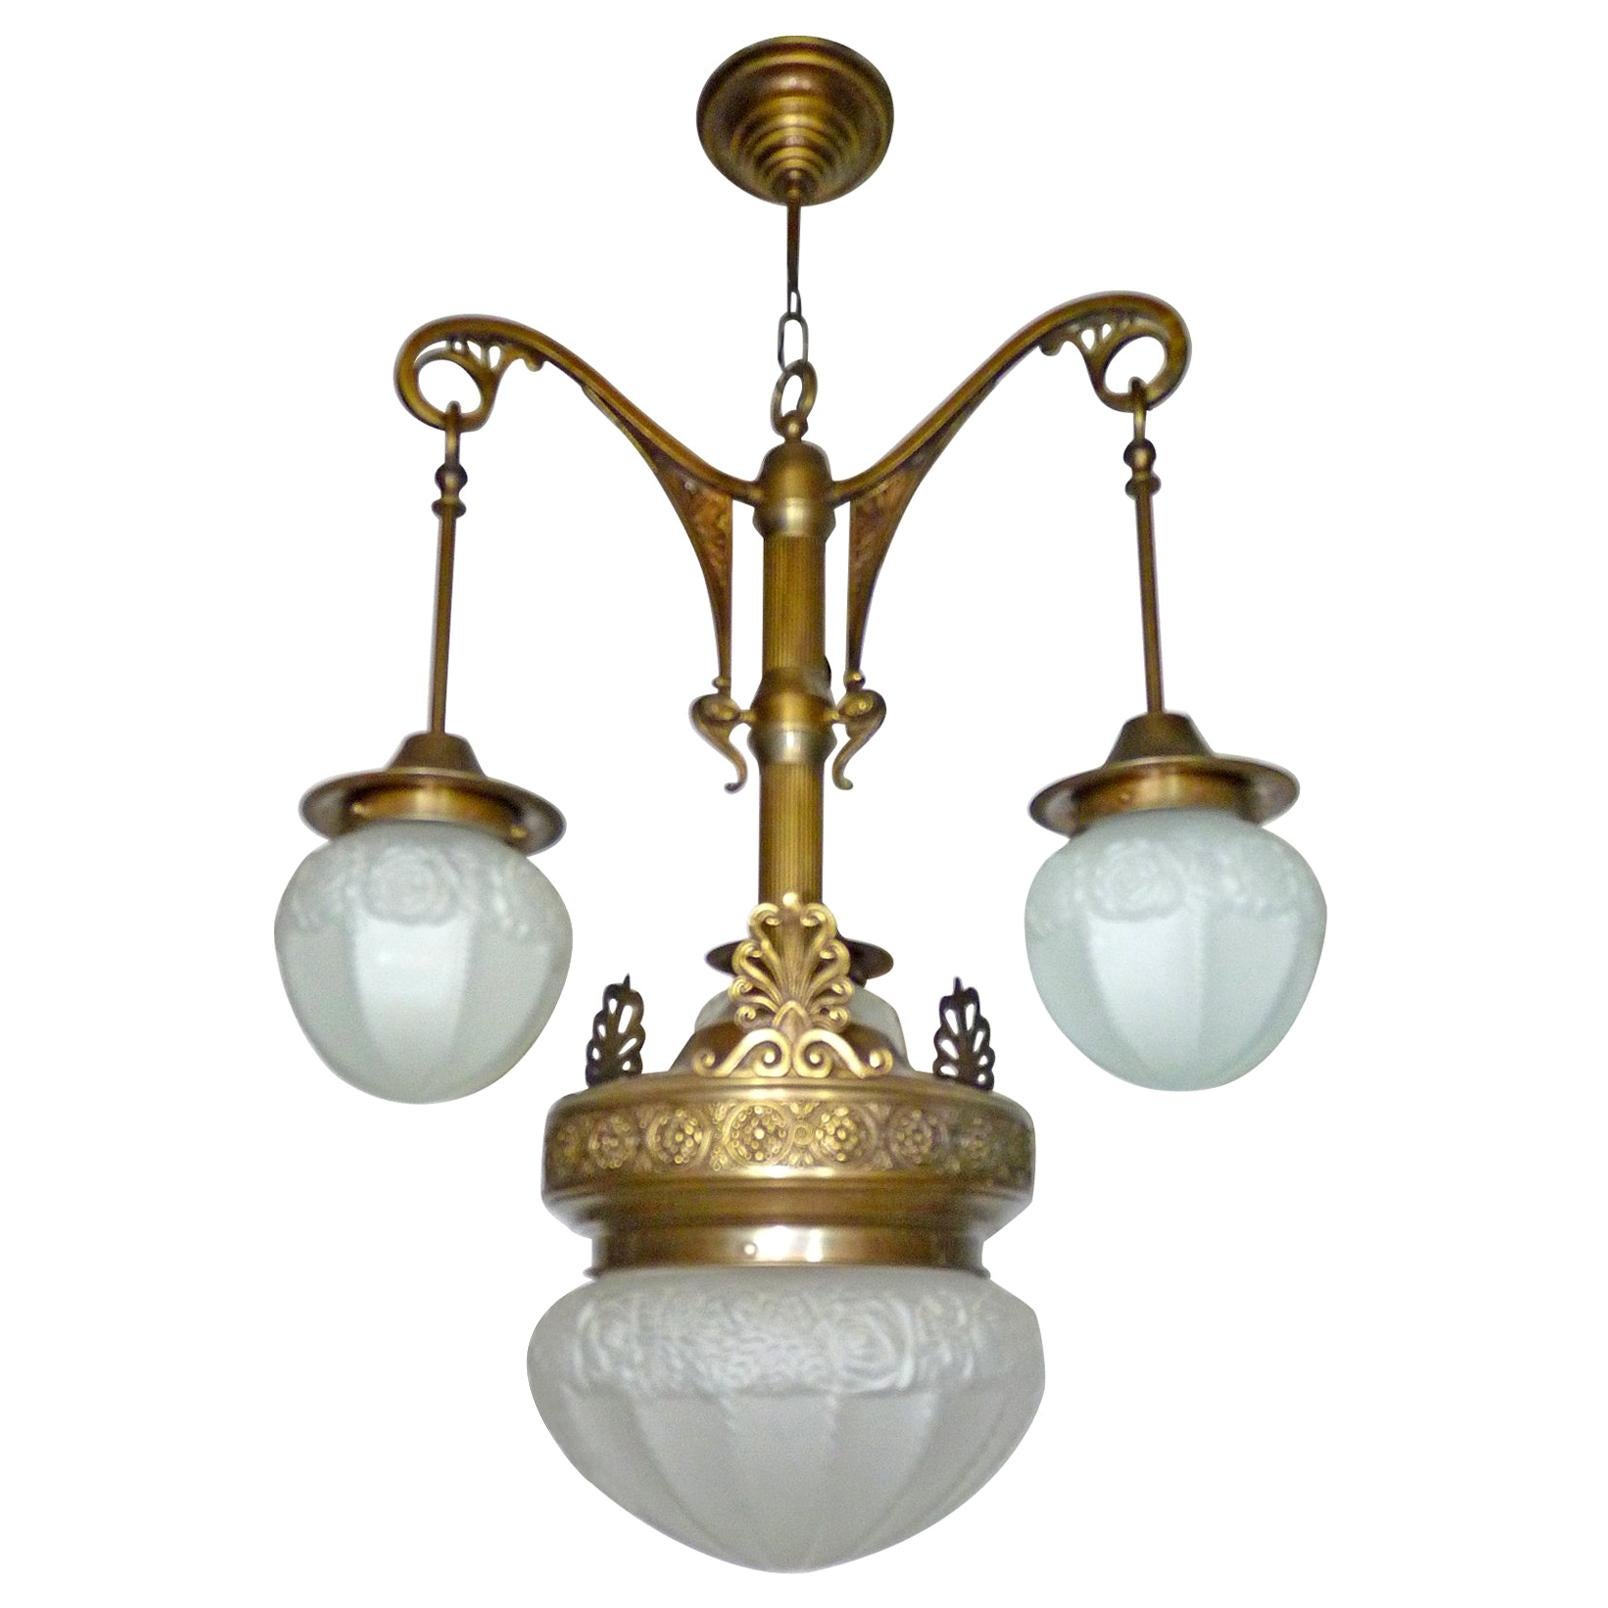 Fabulous French Art Deco Art Nouveau Brass Molded Frosted Glass Chandelier In Good Condition For Sale In Coimbra, PT